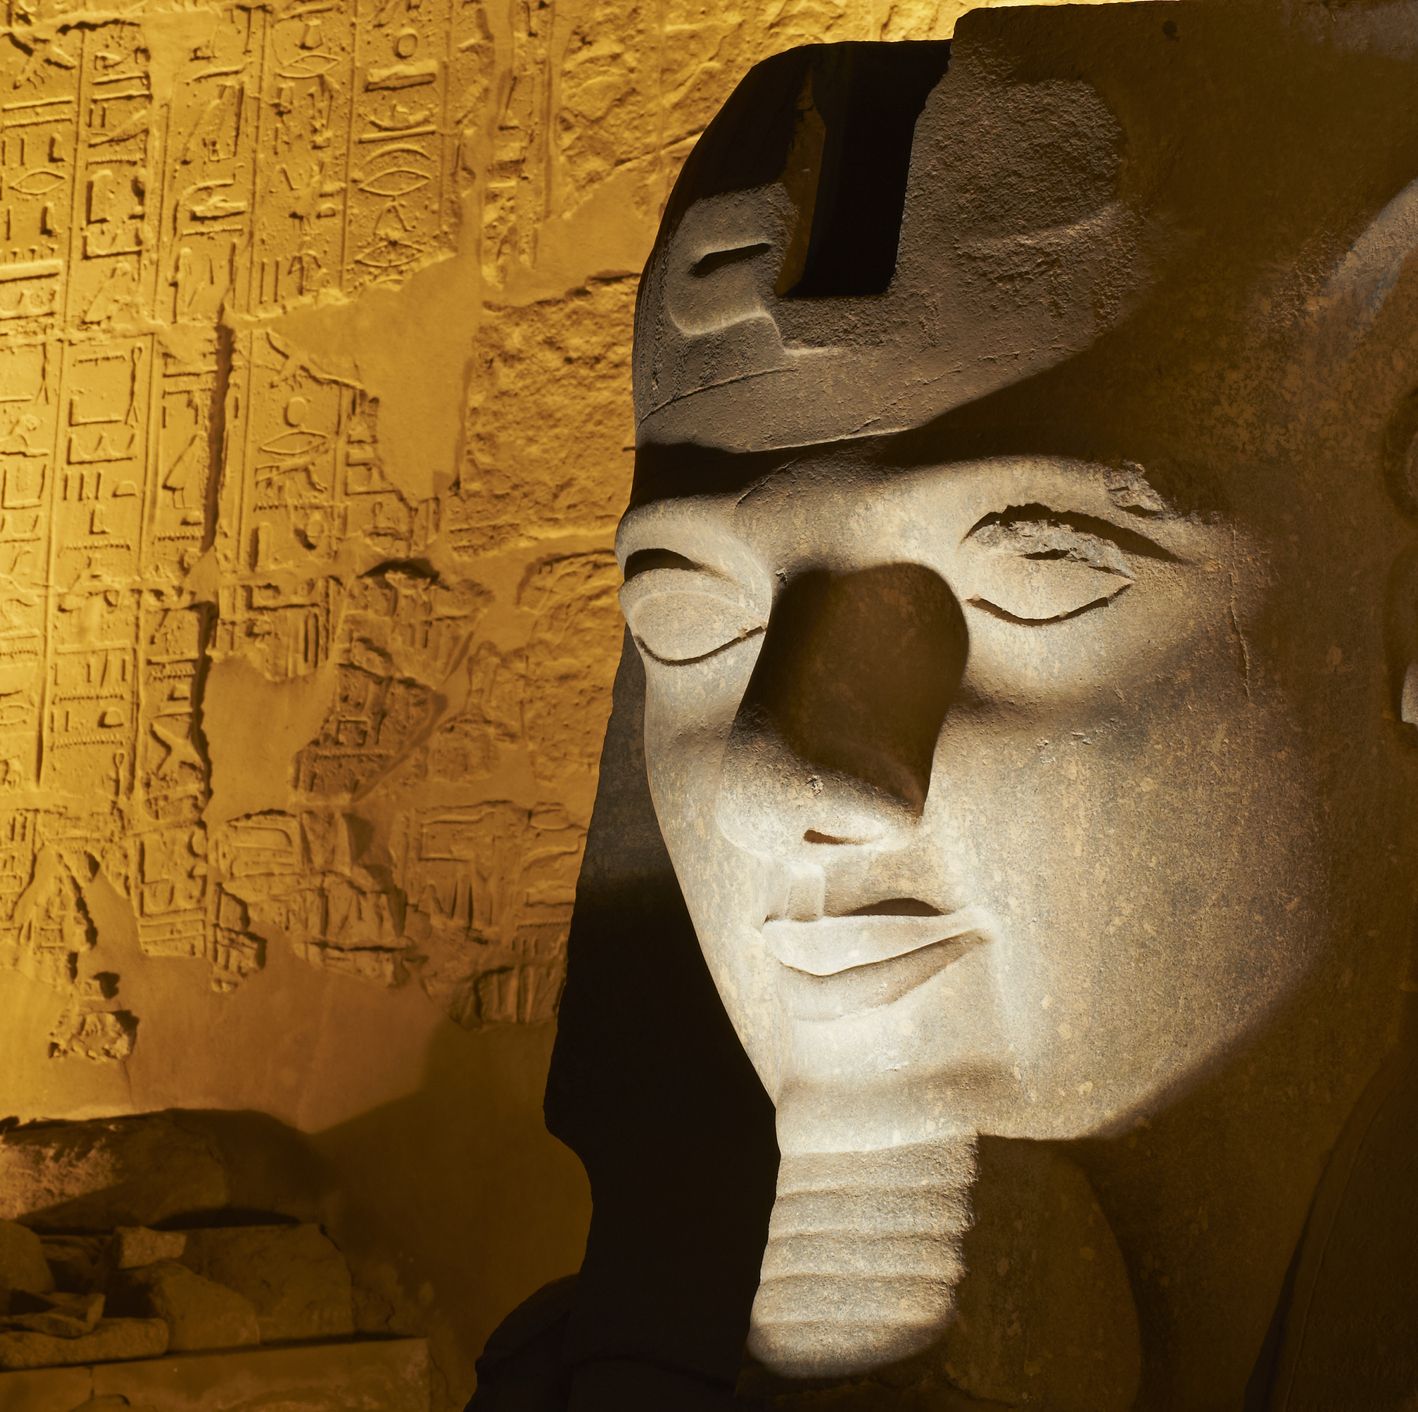 Archaeologists Finally Found the Stunning Lost Sarcophagus of a Legendary Pharaoh